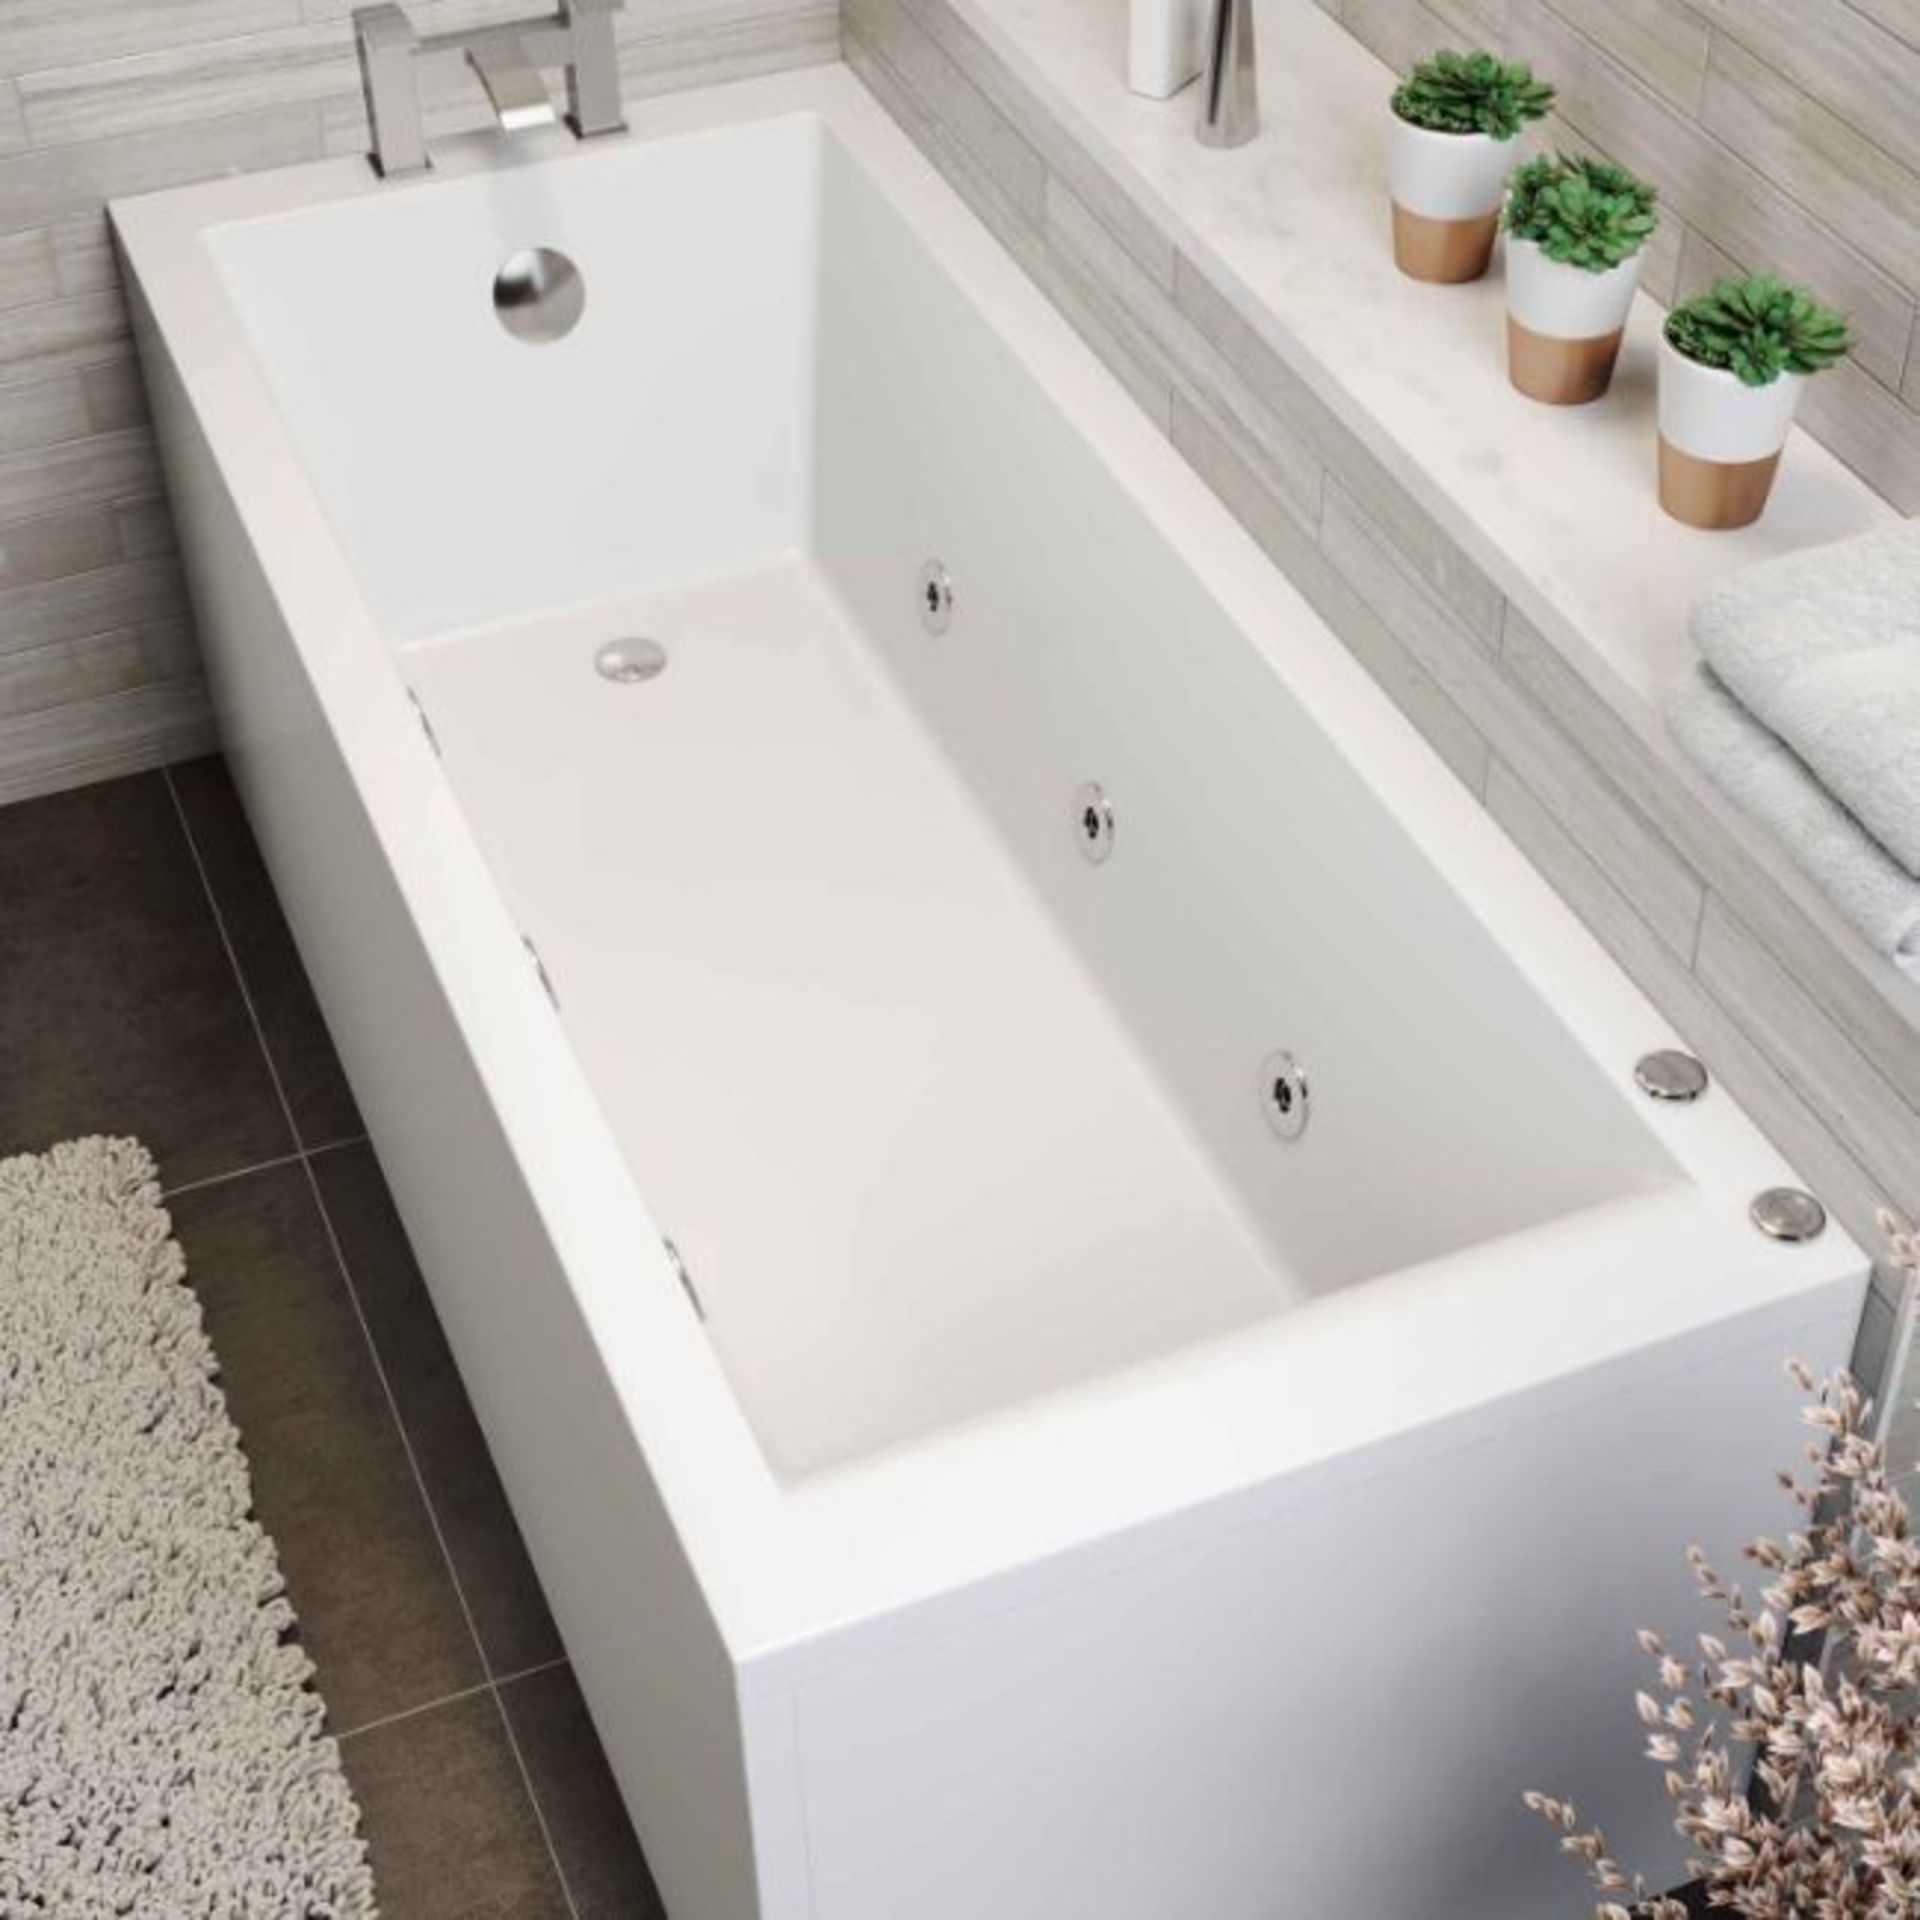 NEW 1700x700x545mm Whirlpool Jacuzzi Single Ended Bath - 6 Jets. RRP £1,299.99.Spa Experience... - Image 3 of 3